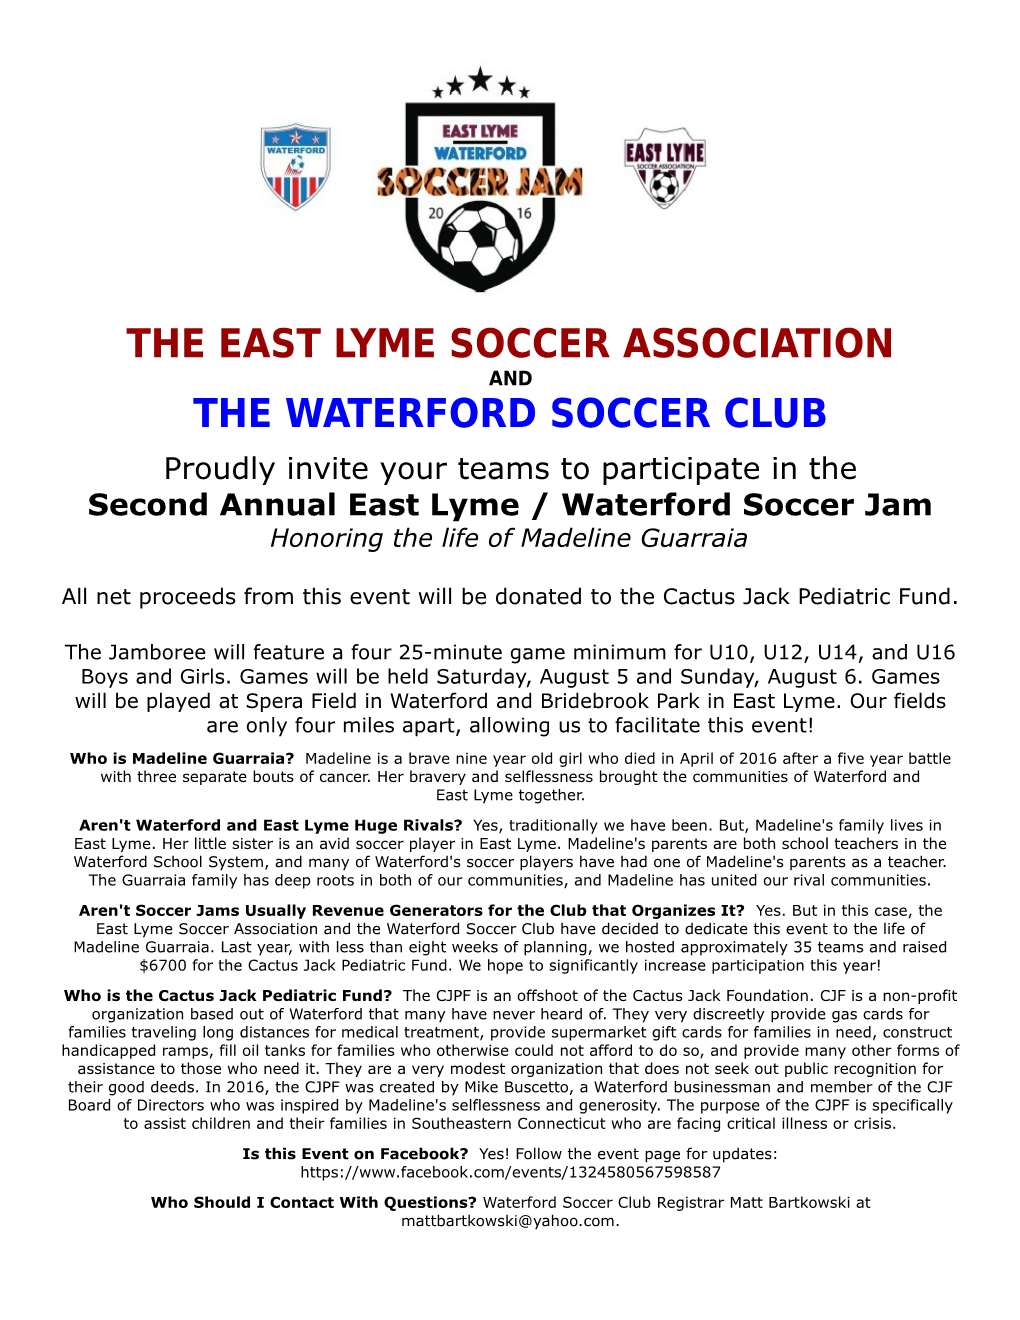 The East Lyme Soccer Association And